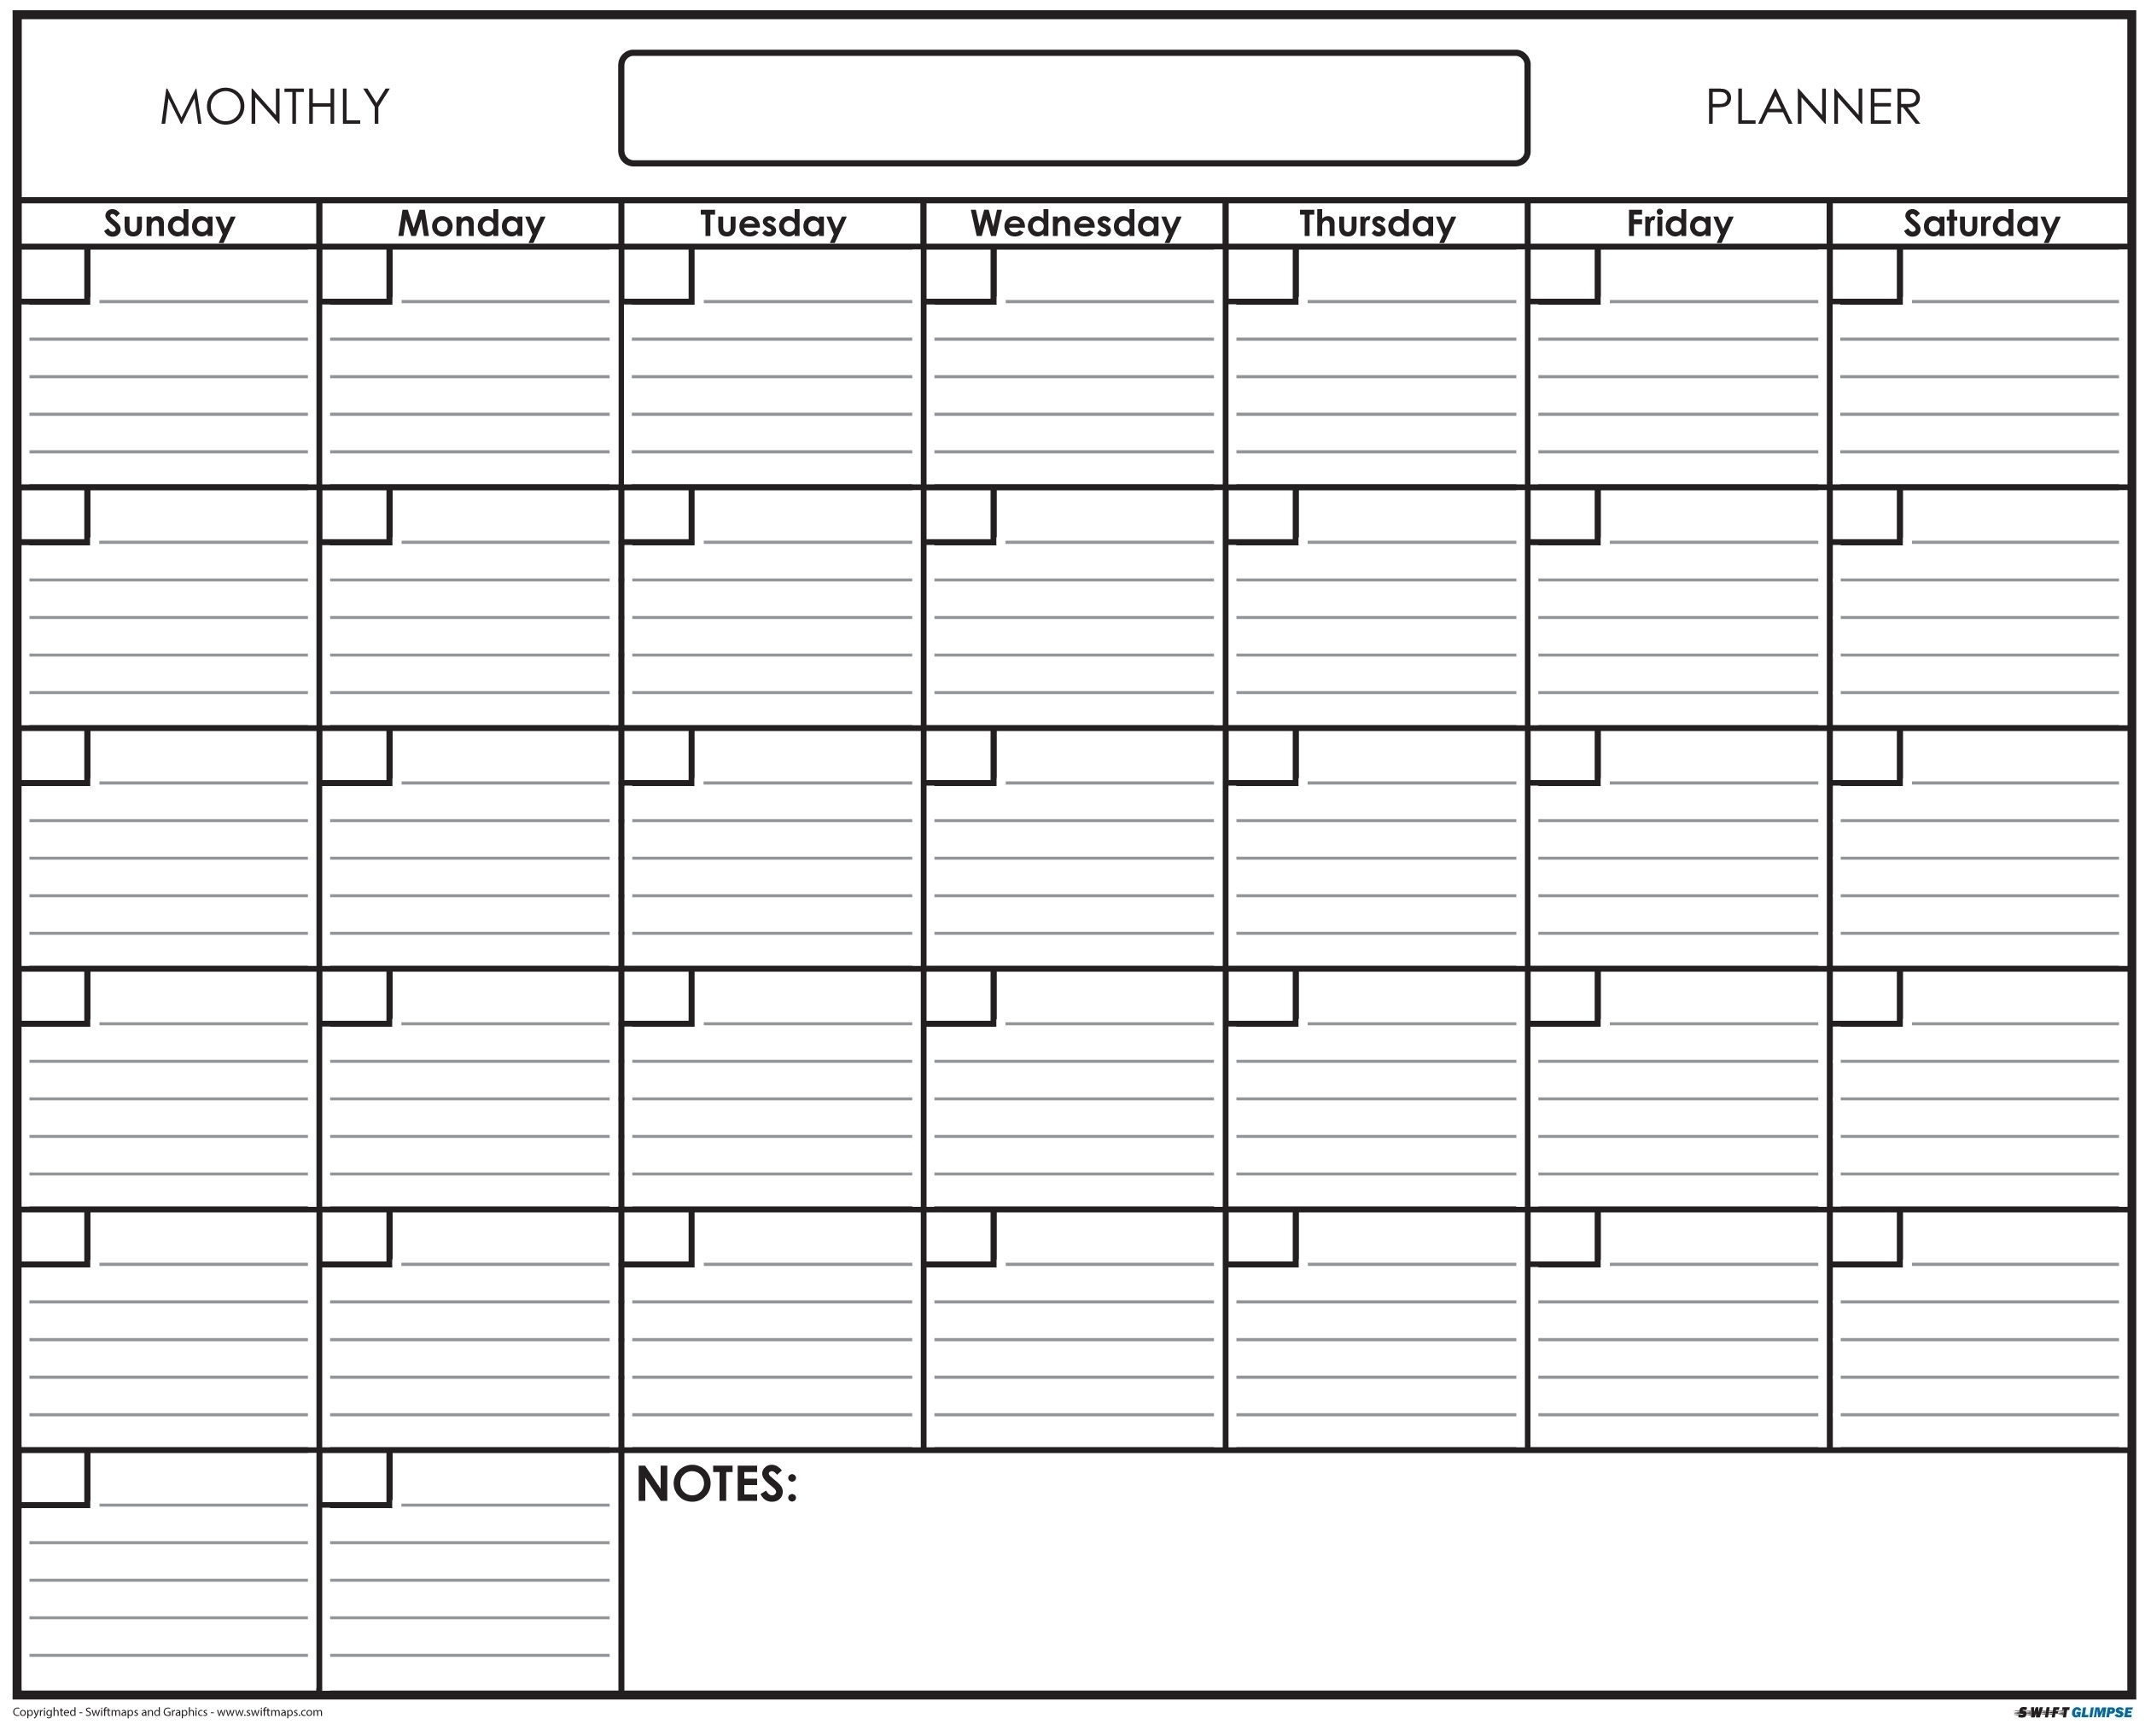 Blank Monthly Calendar With Lines | Template Calendar Printable for Blank Monthly Calendar Printable With Lines